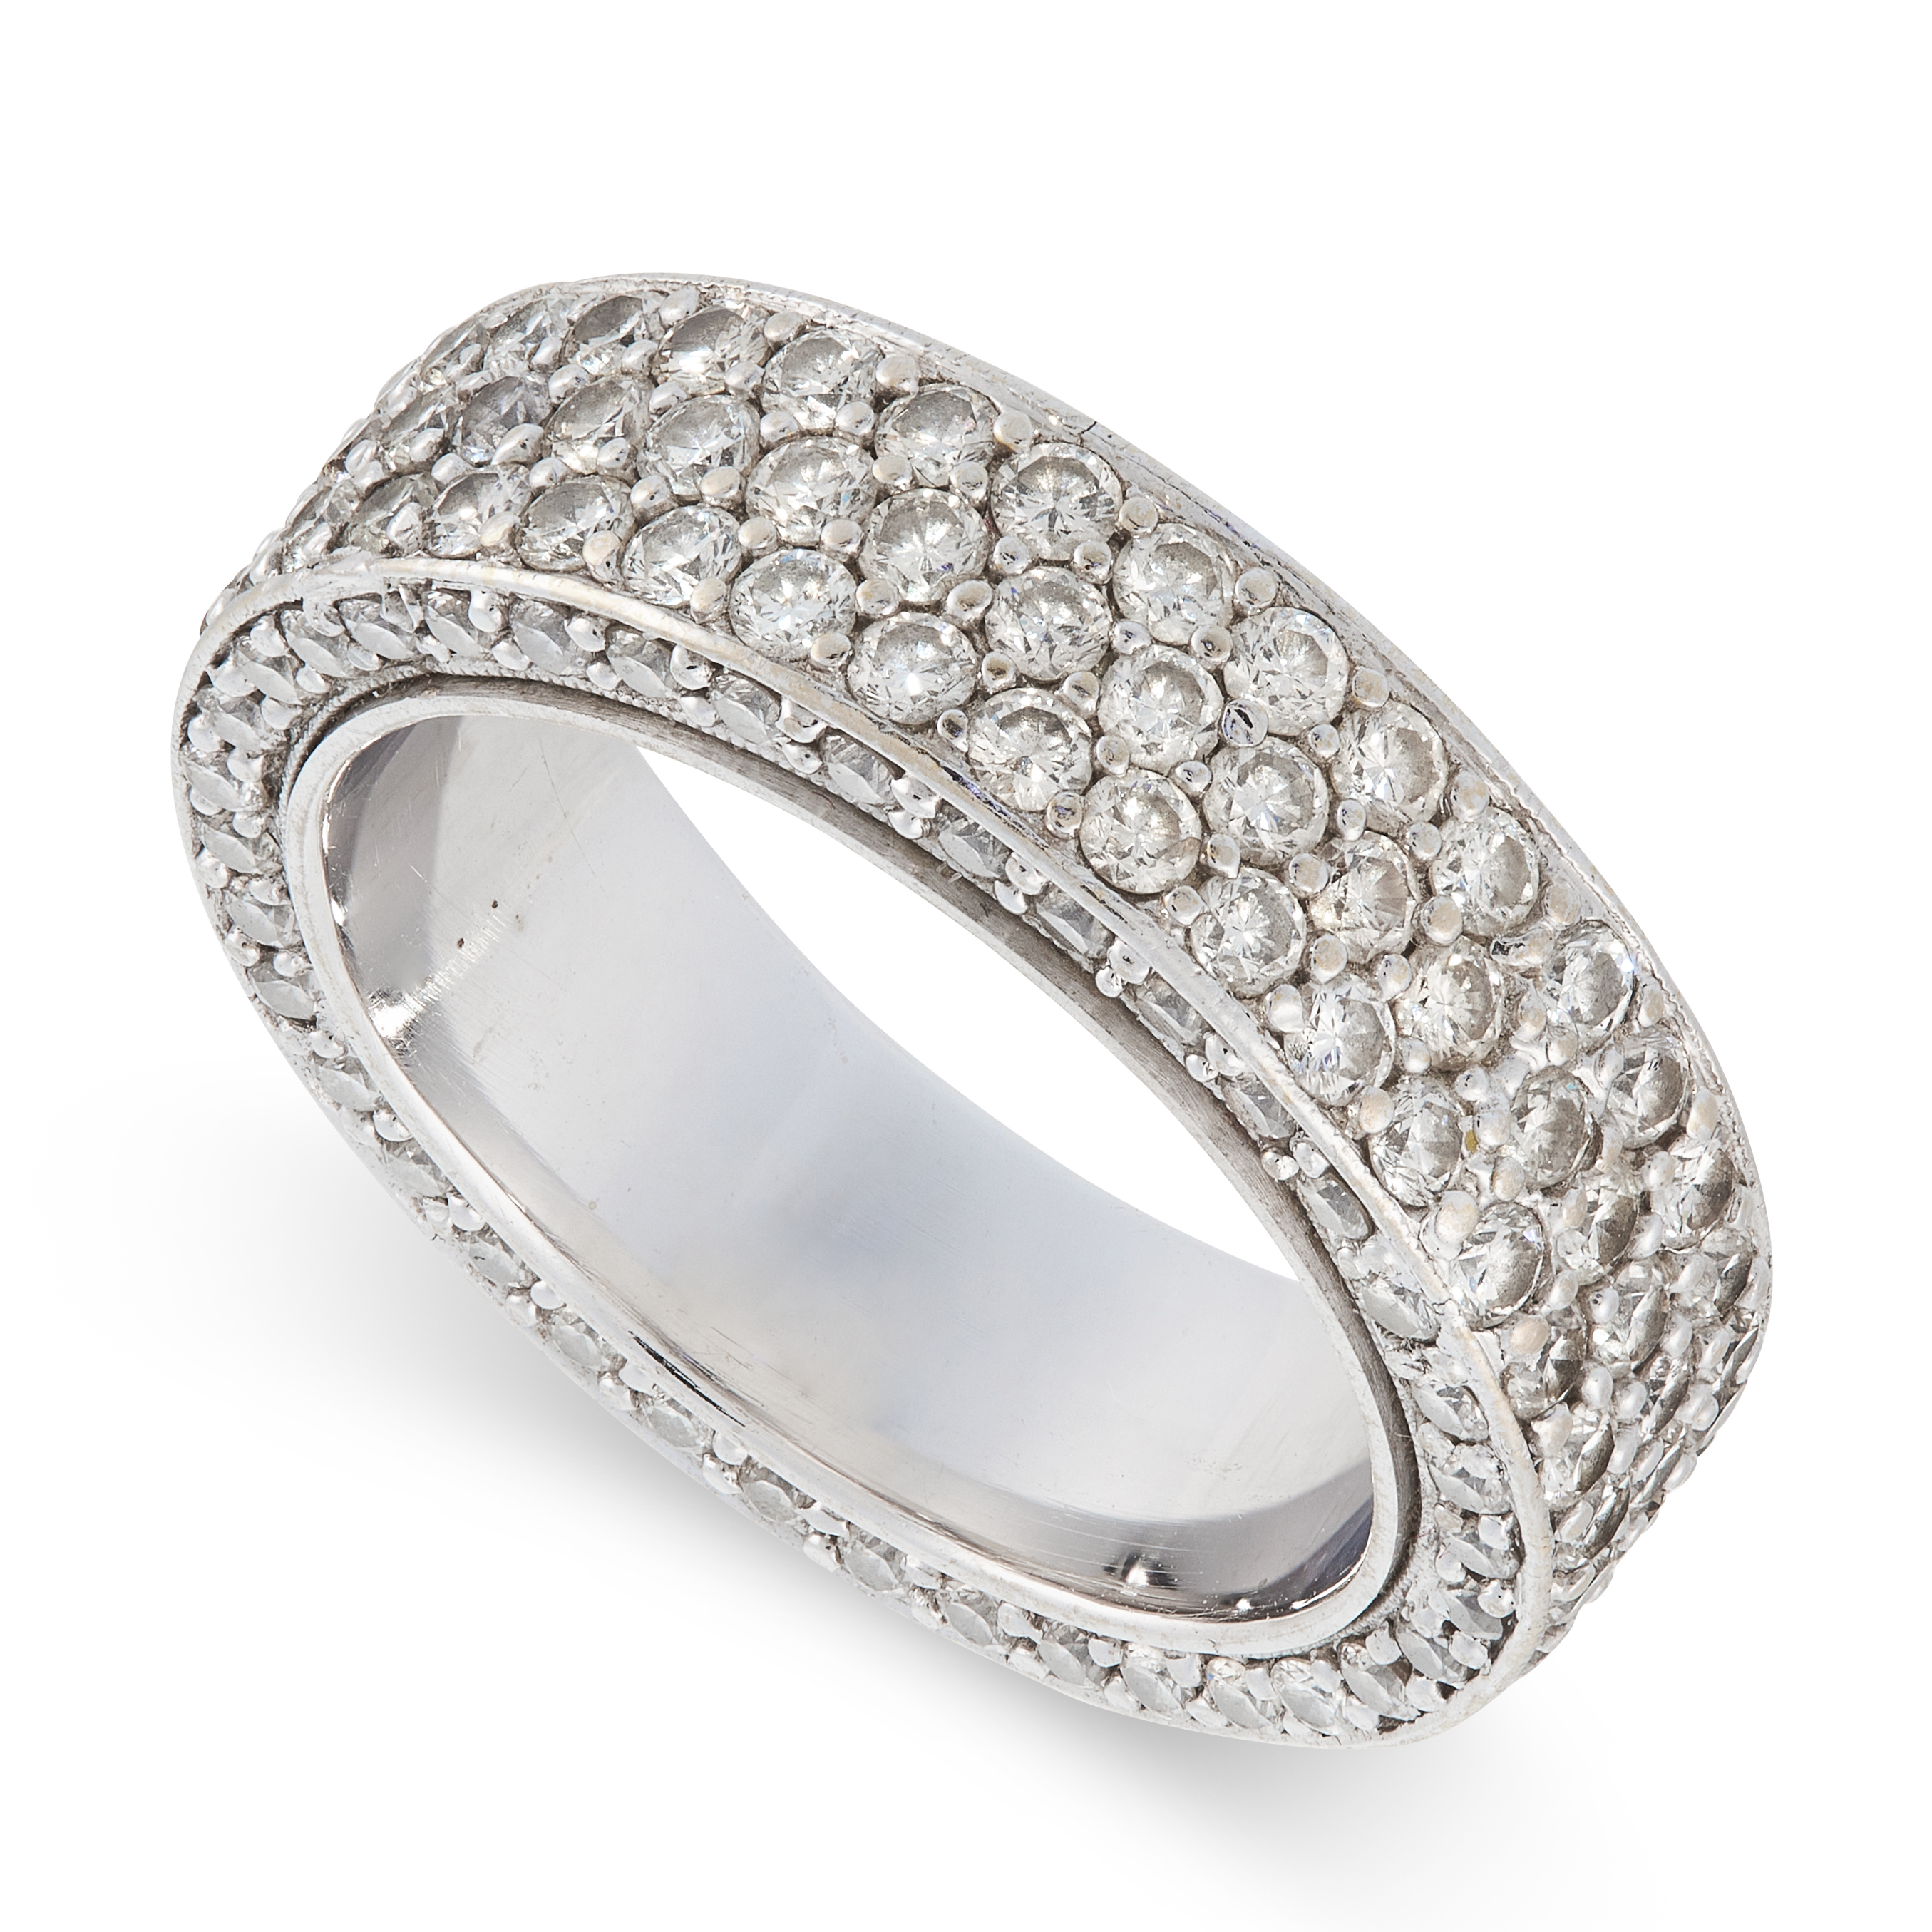 A DIAMOND ETERNITY RING set with five rows of pave set round cut diamonds, unmarked, size Q / 8,